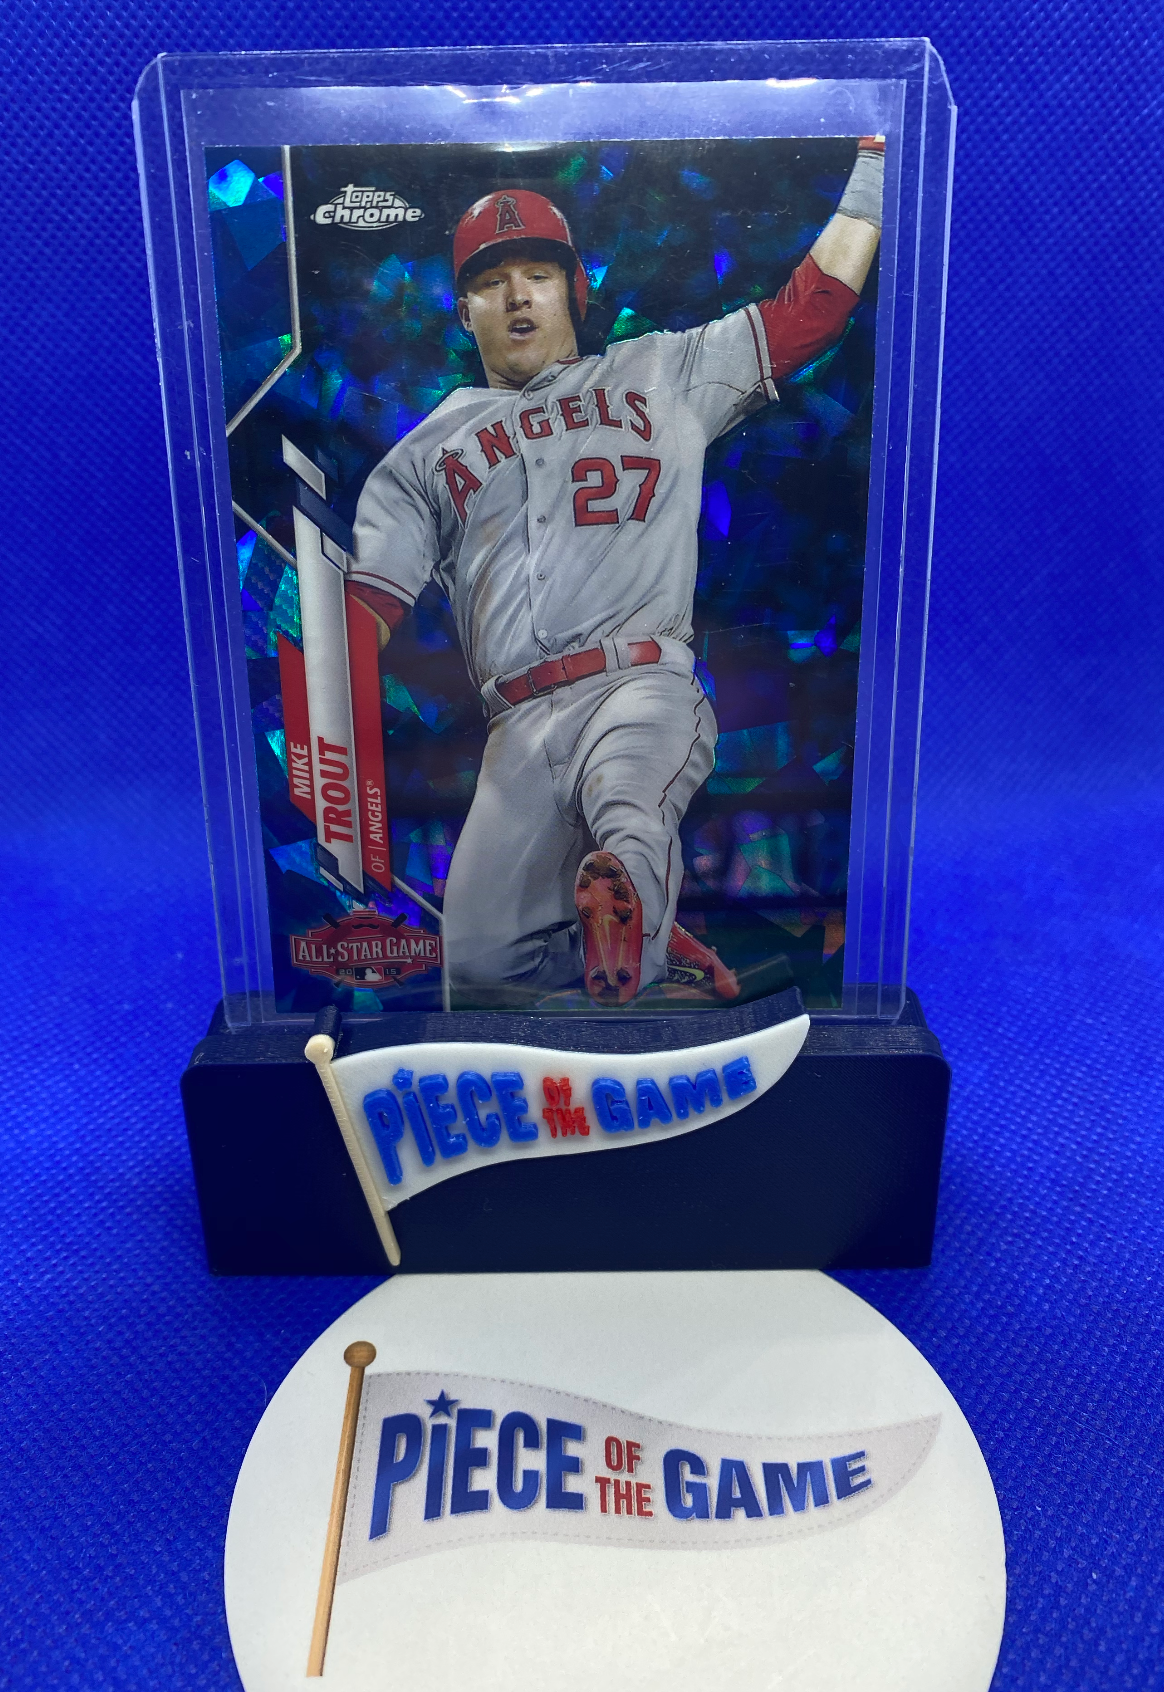 2020 Topps Chrome Sapphire All-Star Game Mike Trout – Piece Of The